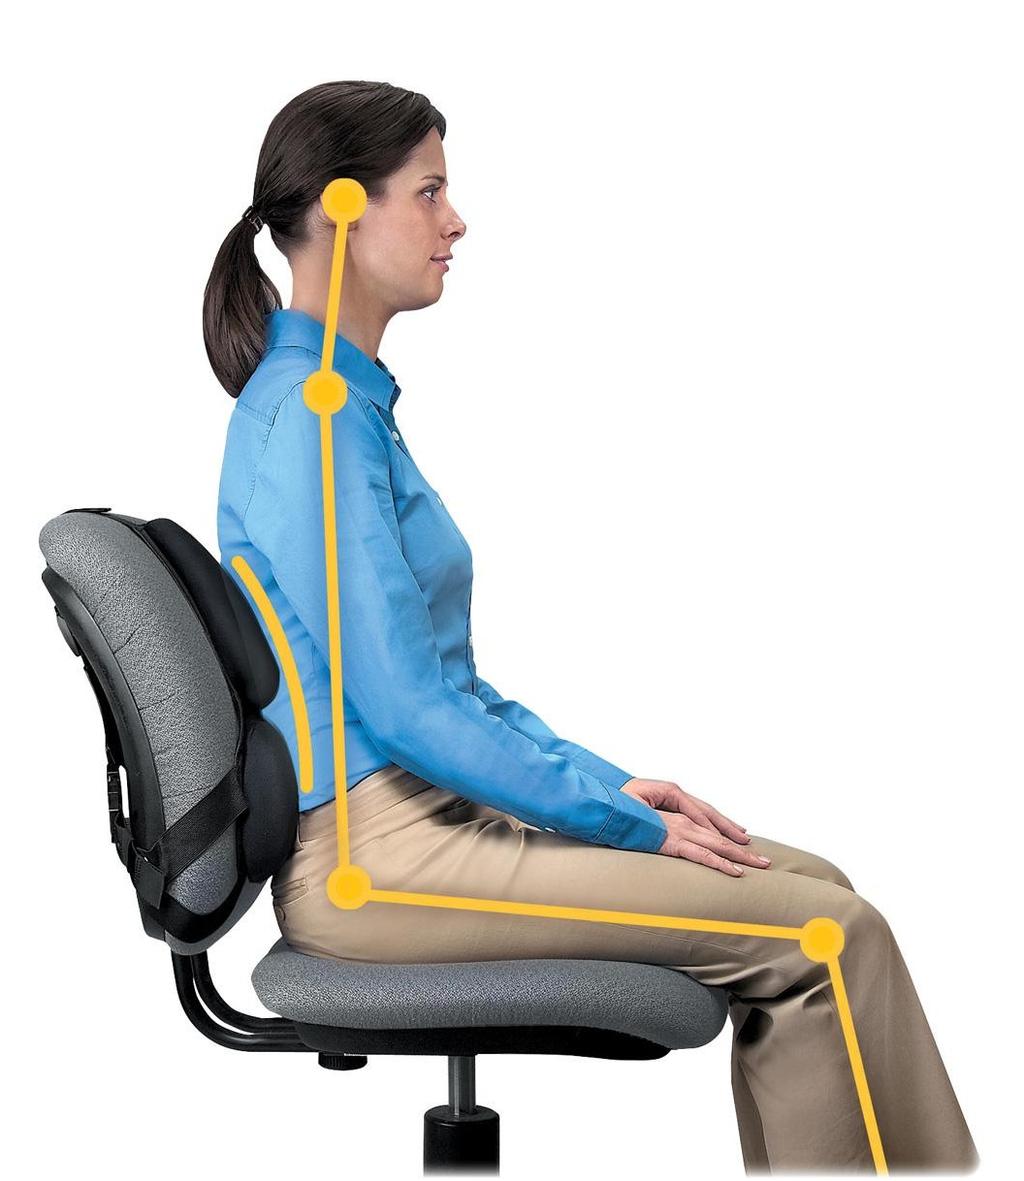 Memory Foam Back Support Mid-spinal support with memory foam cushion promotes good posture